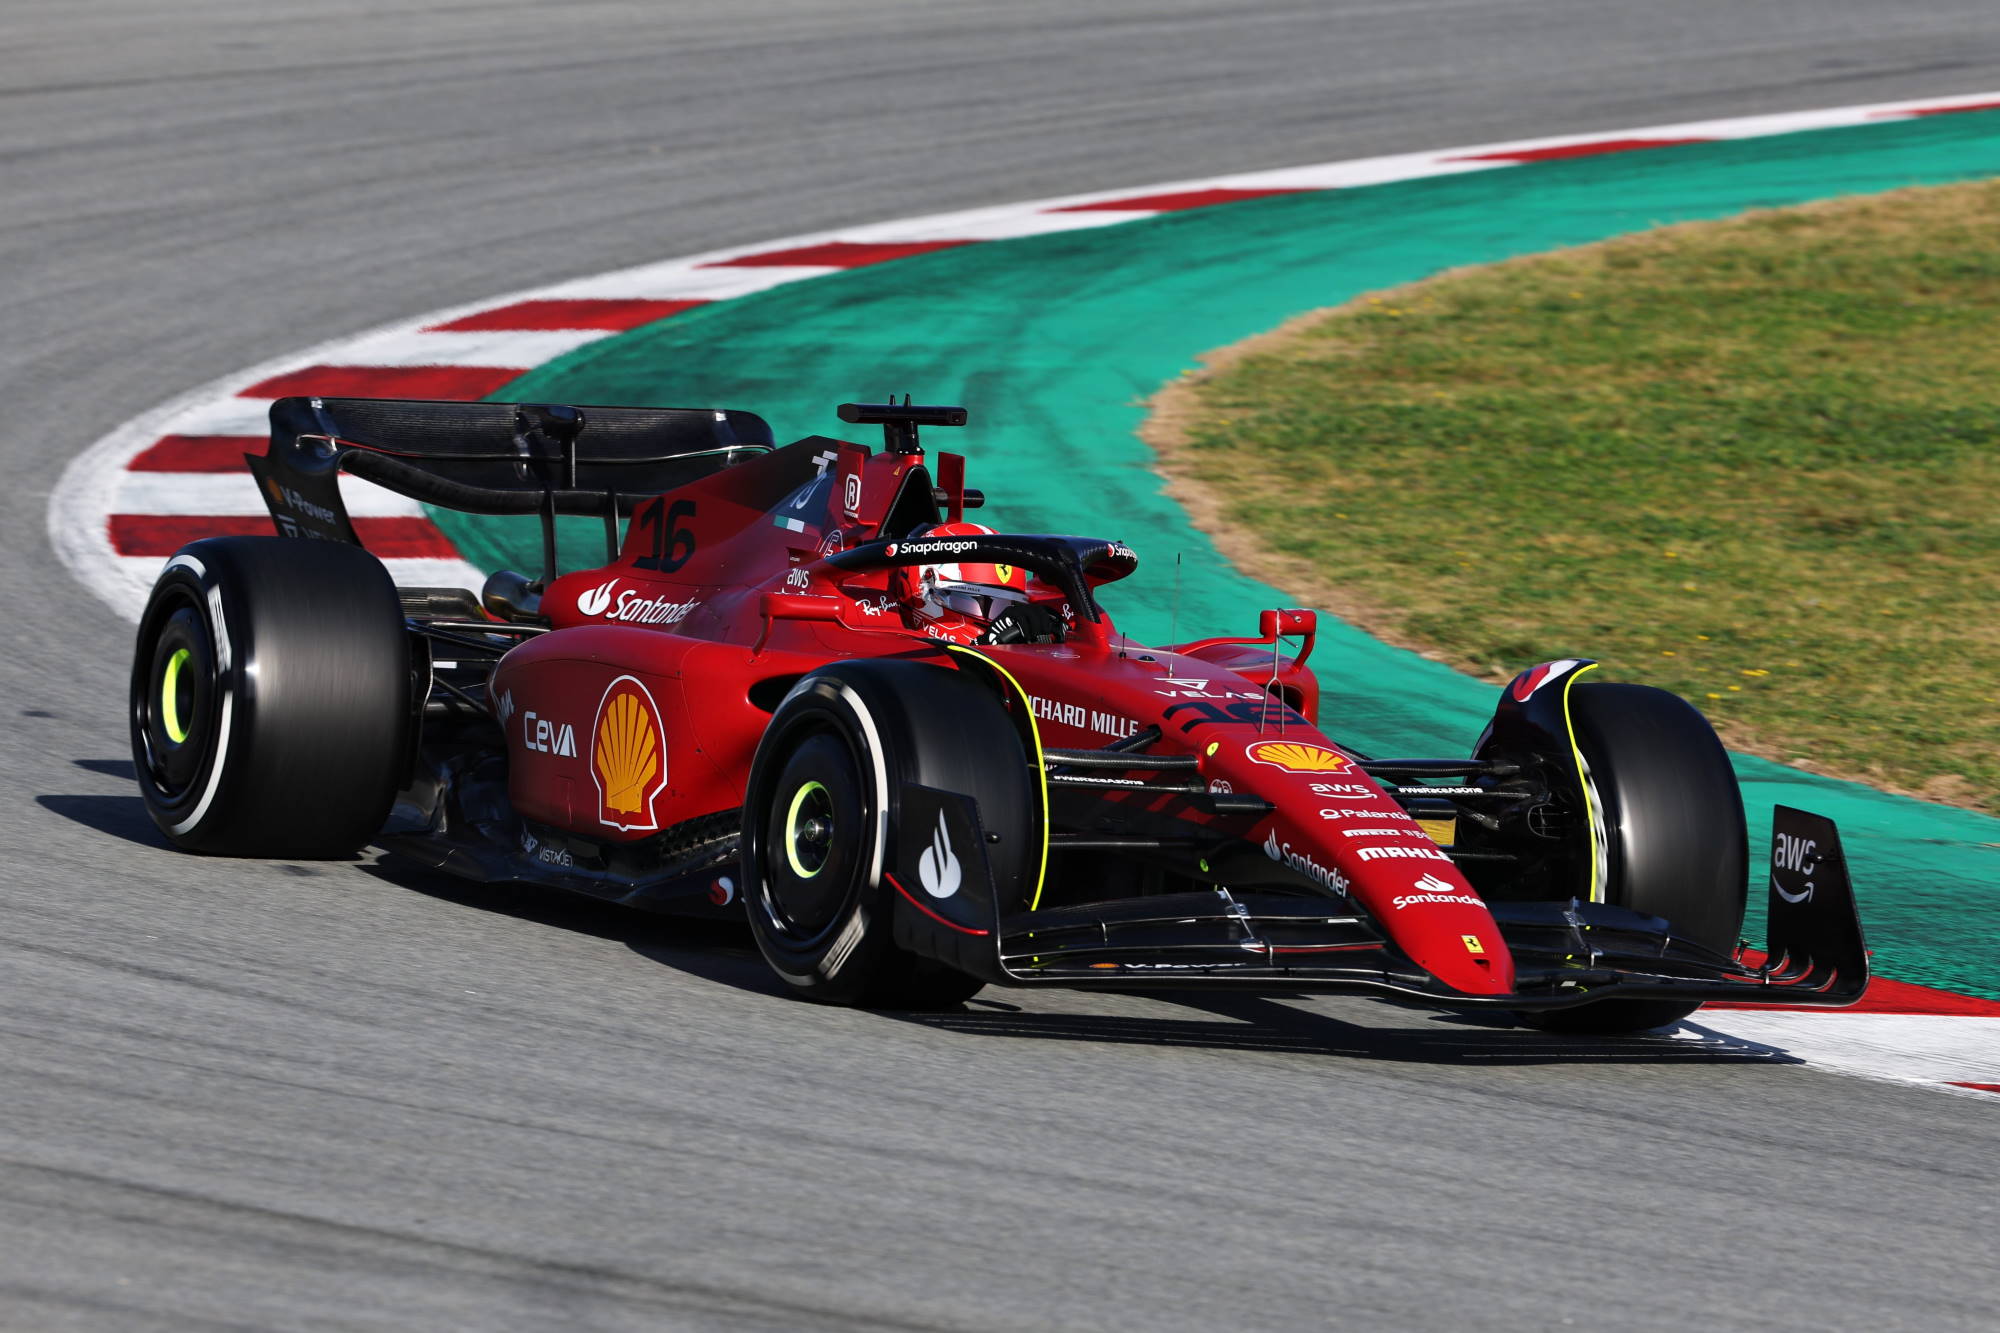 Leclerc sets pace for Ferrari on first morning in Barcelona